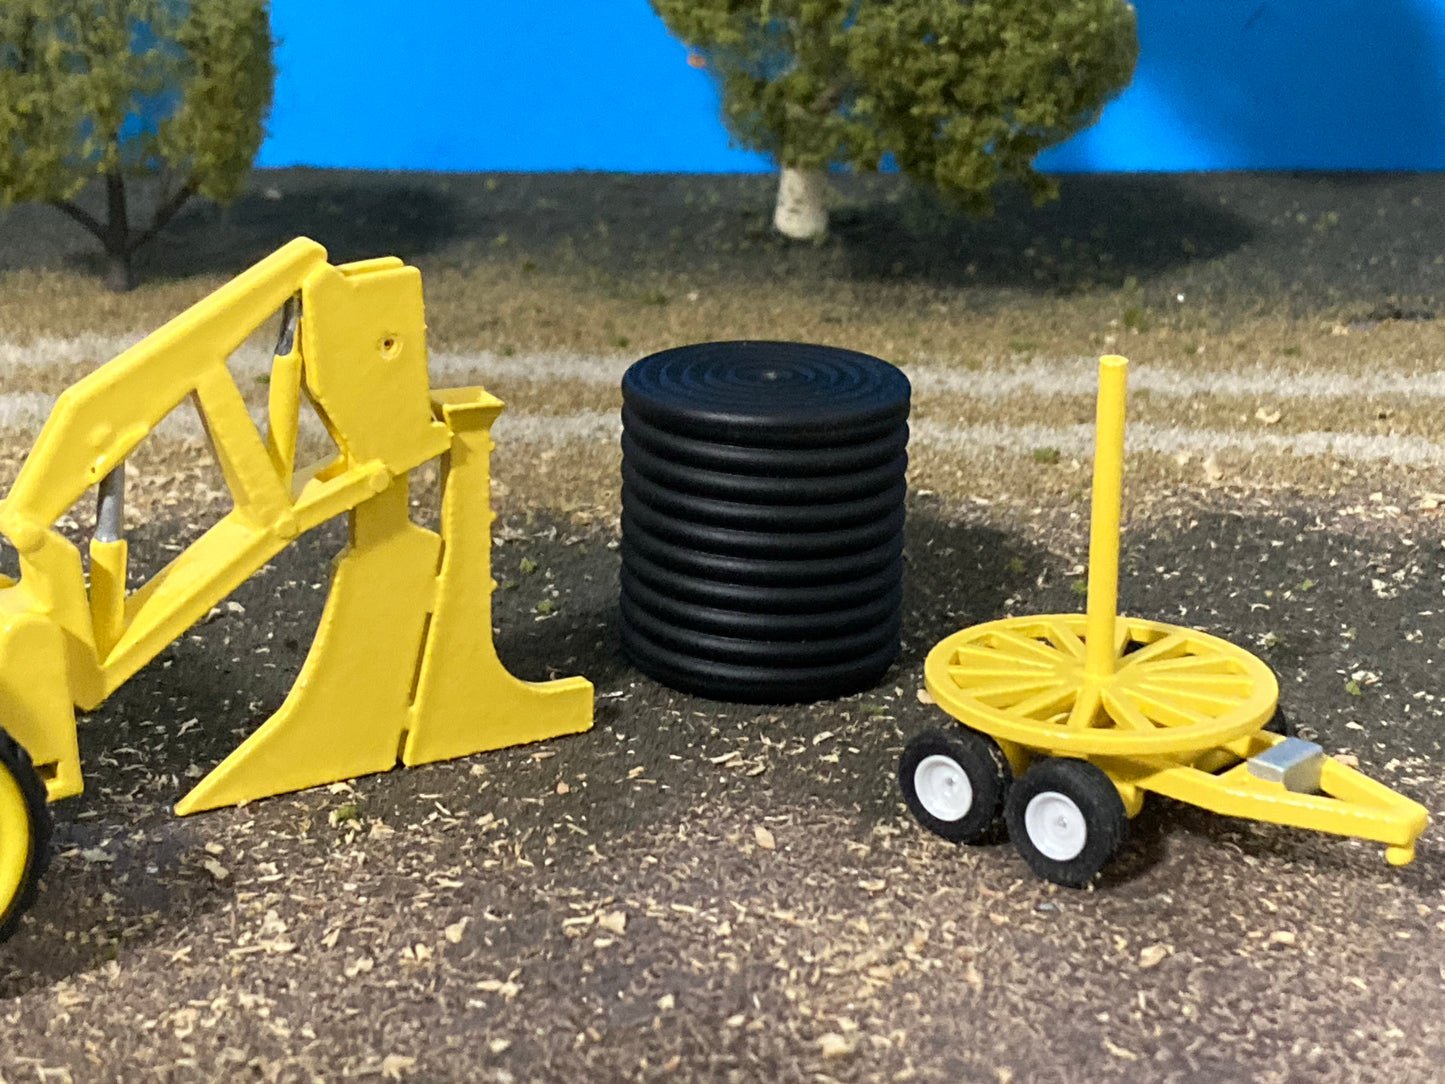 1/64 Tile Plow Set w/ Tile Roll and Stringer Cart (yellow)